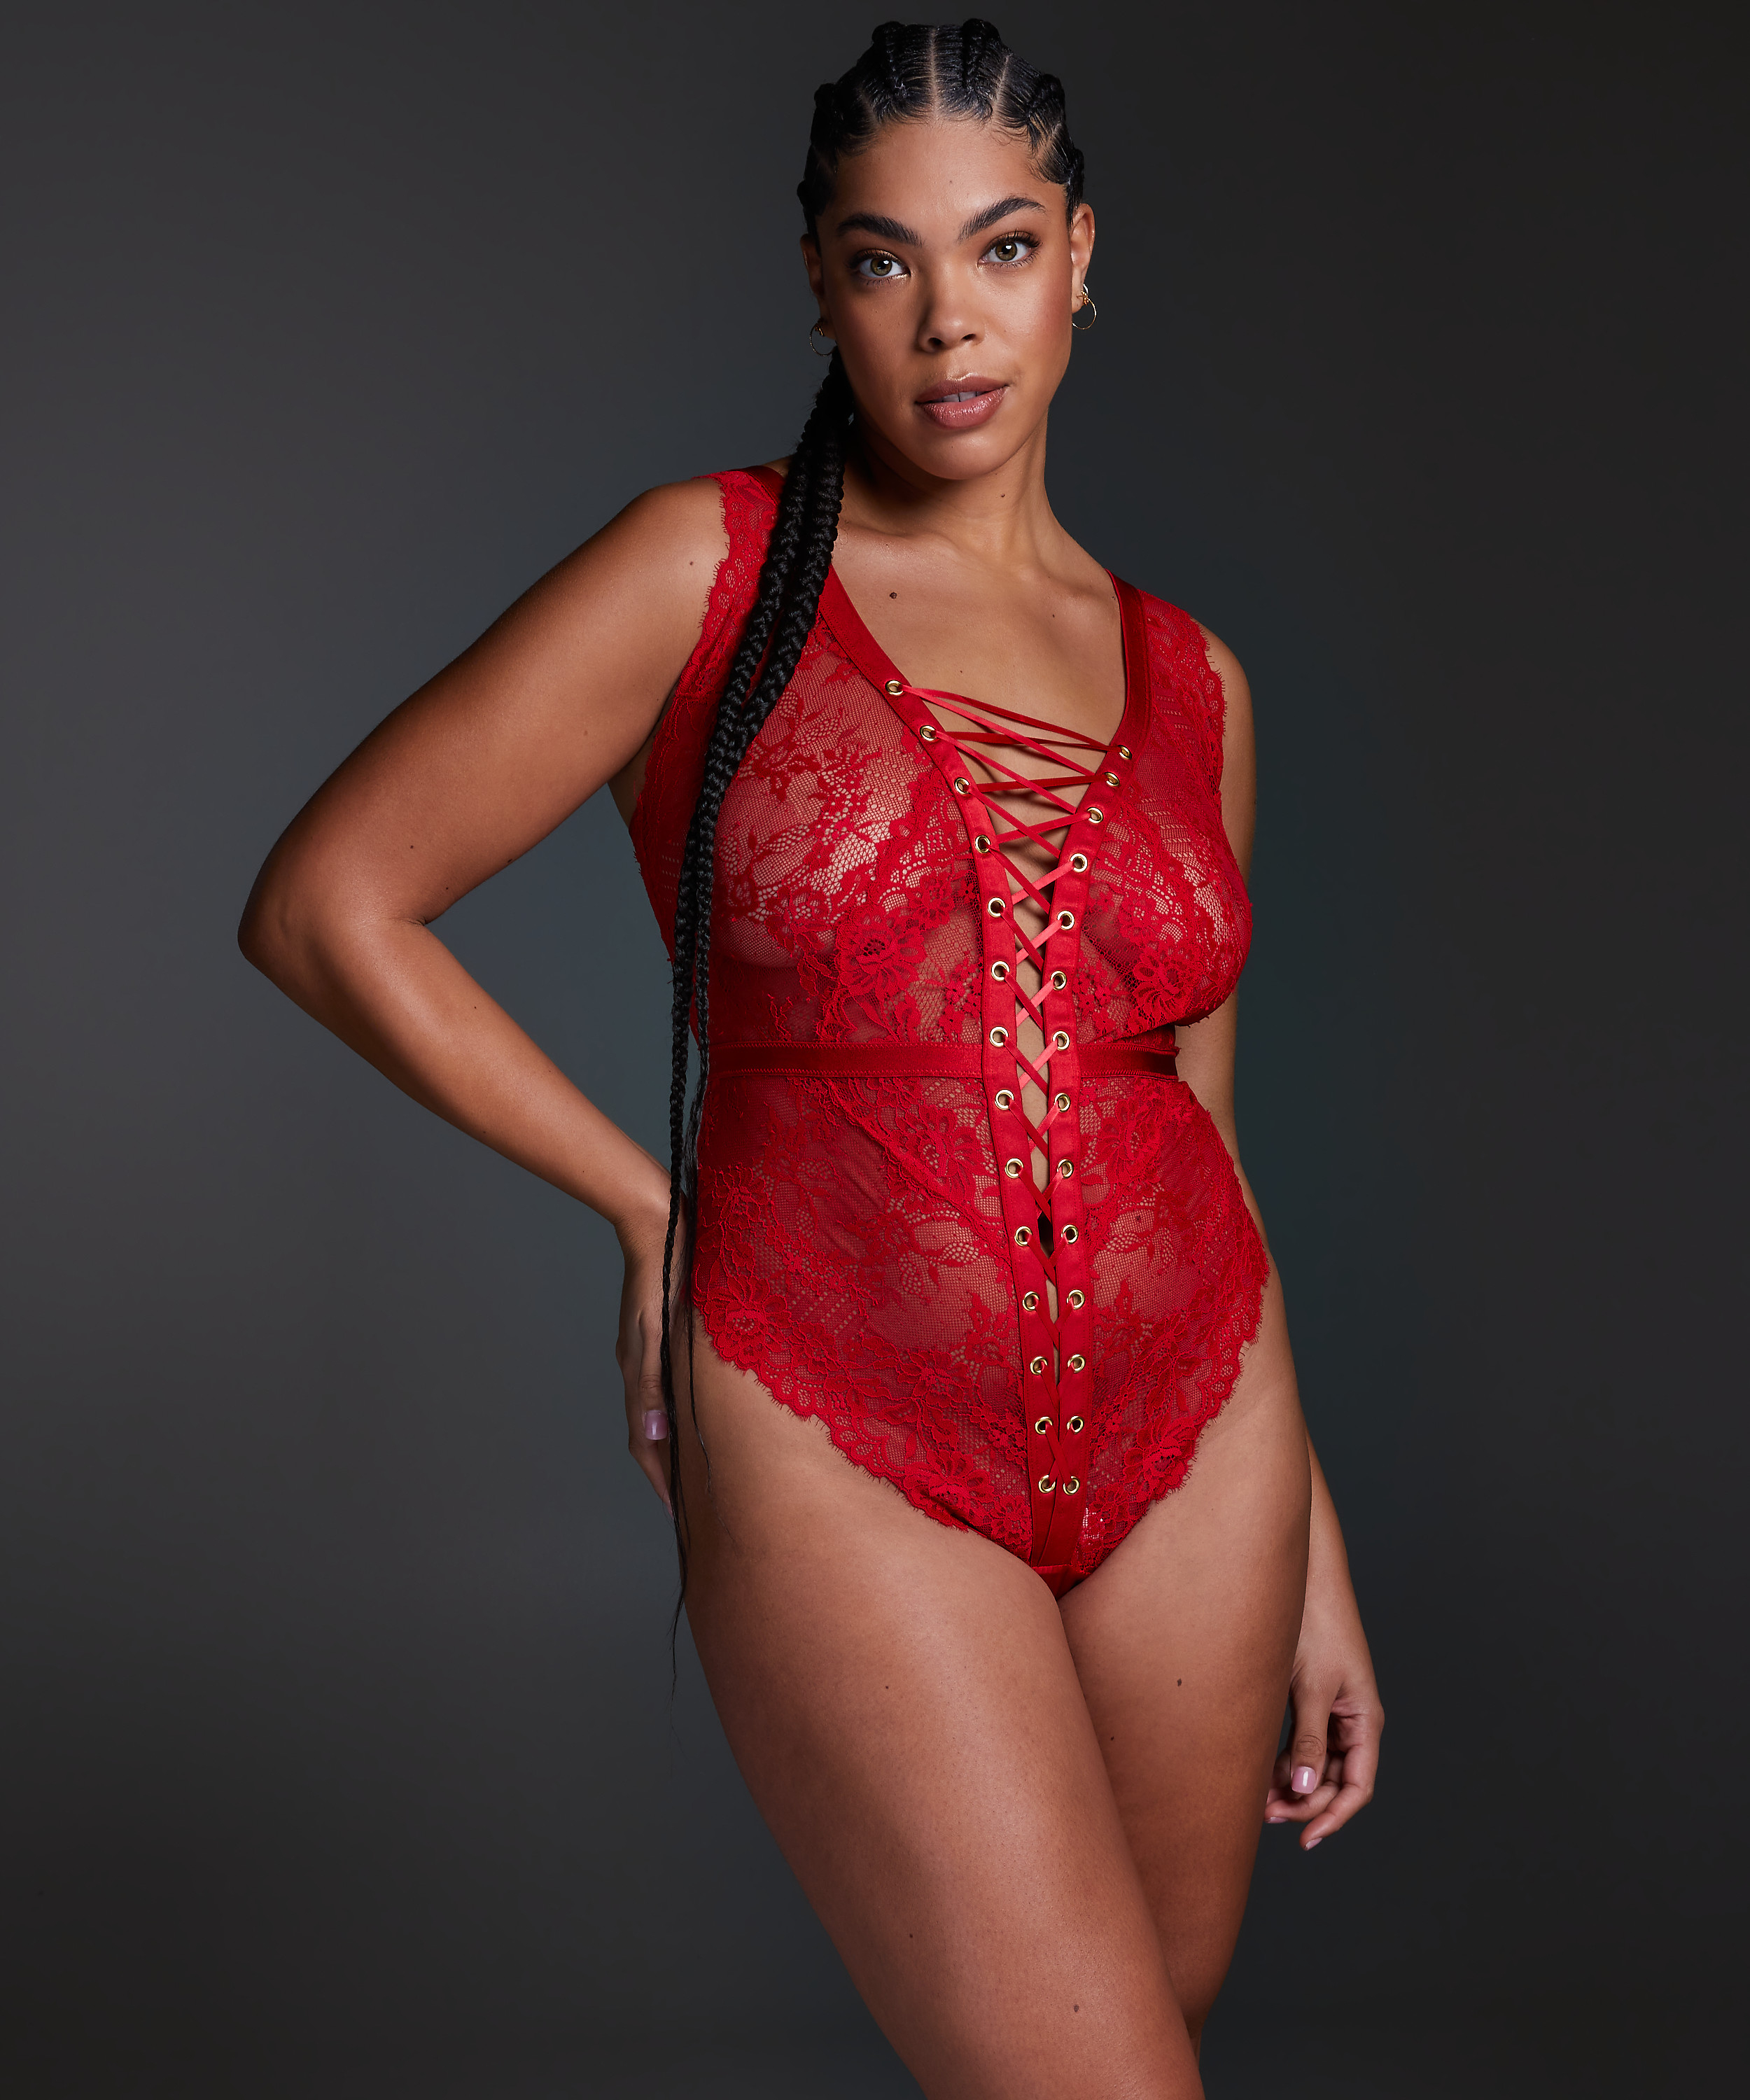 Private Body Taylor Curvy, Rot, main